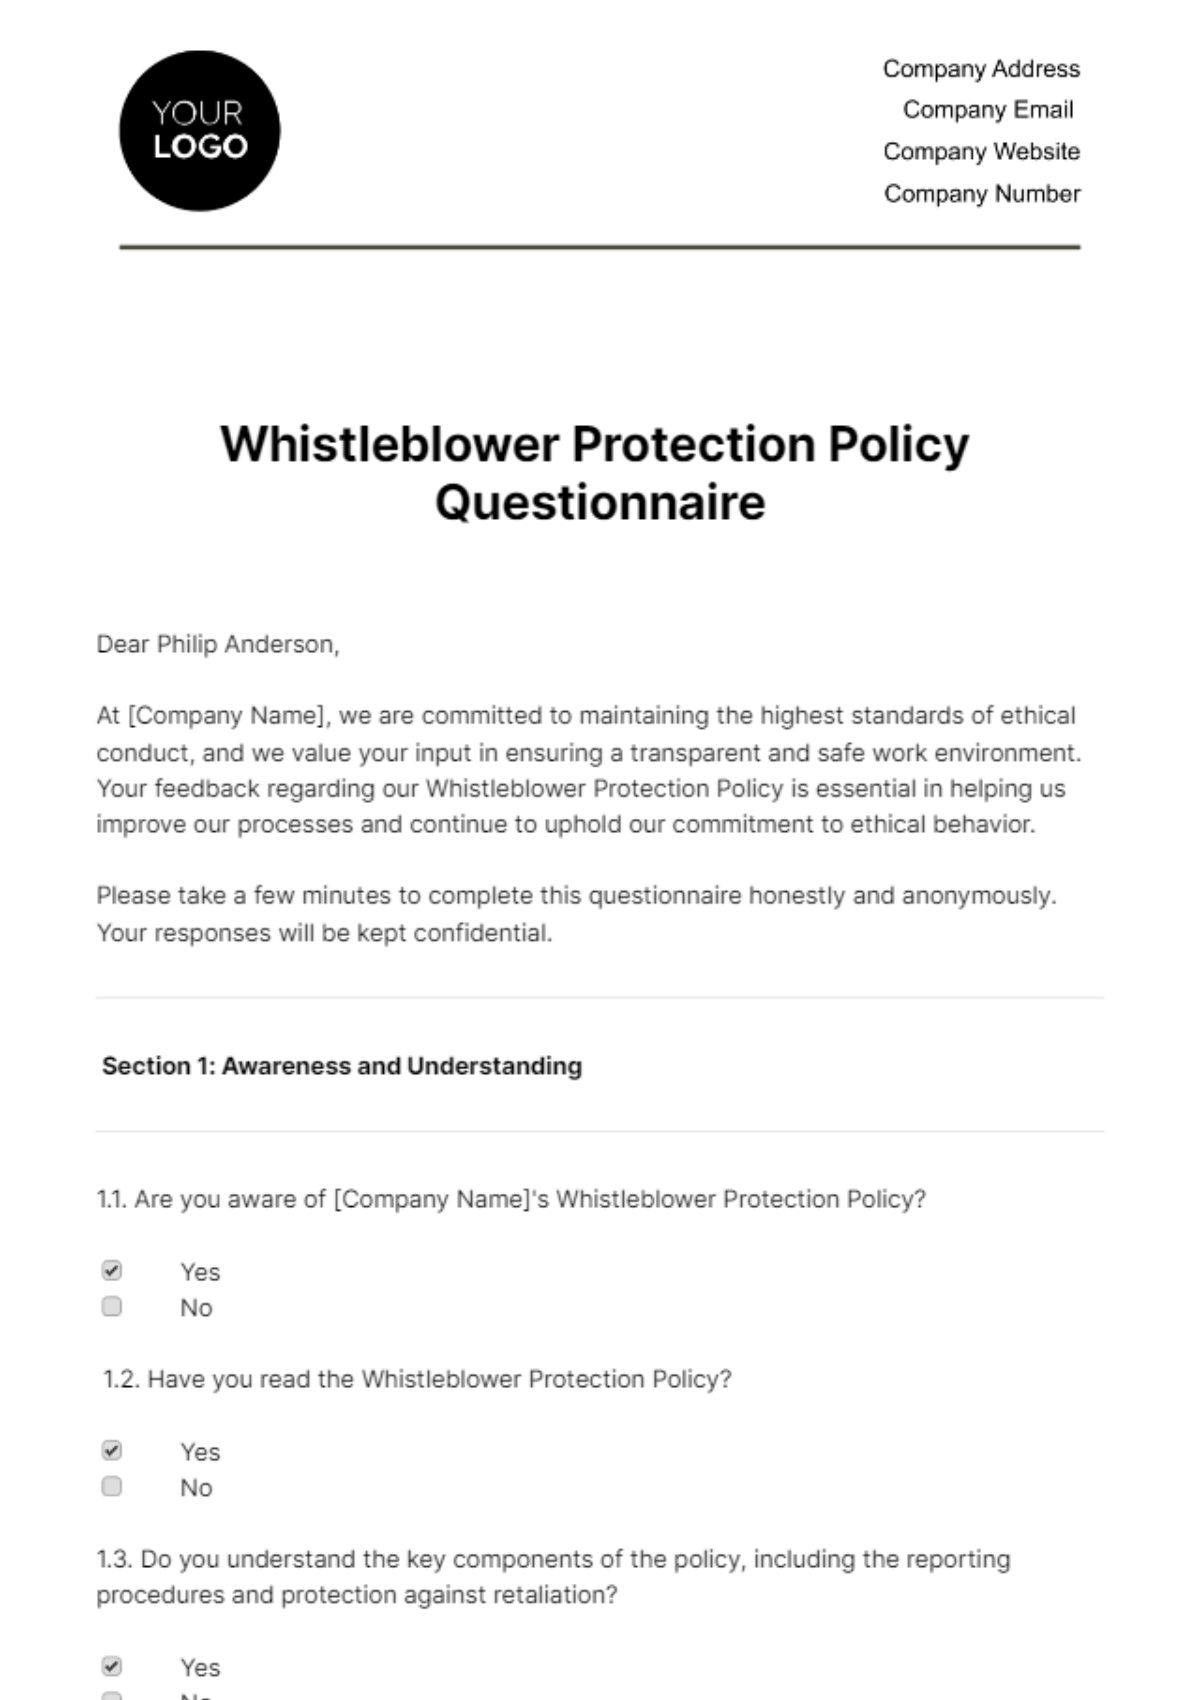 Whistleblower Protection Policy Questionnaire HR Template